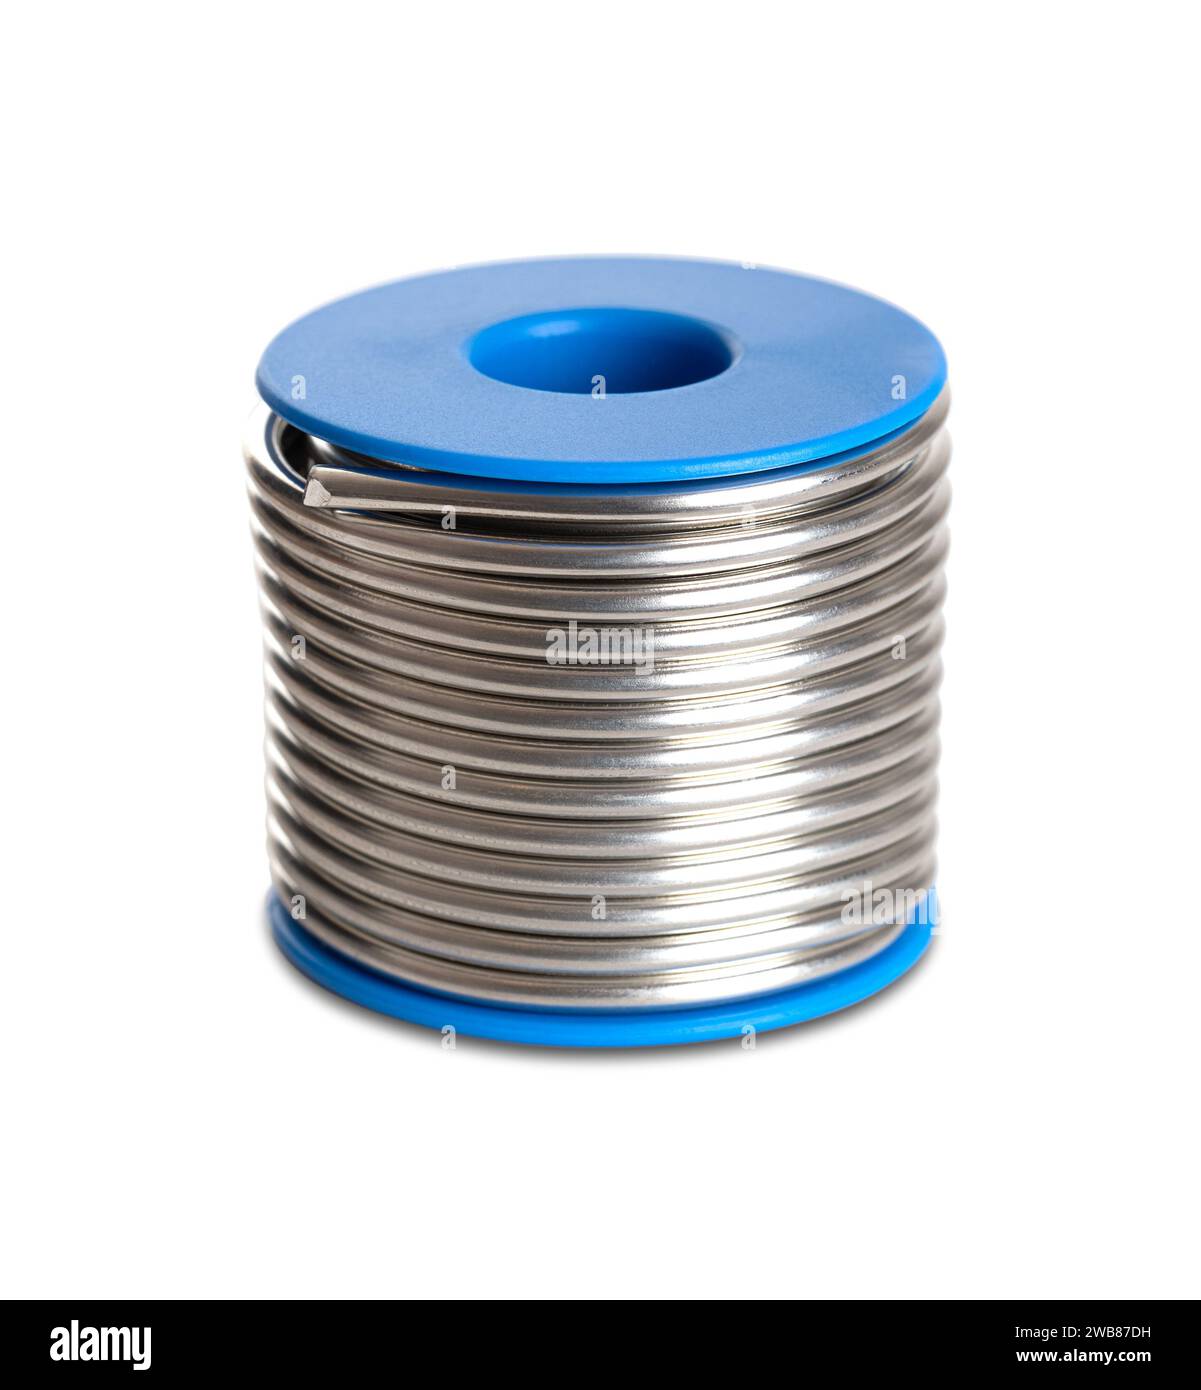 Spool of soft solder wire, with a diameter of 3 millimeters. Fittingslot, fusible metal alloy of tin and copper. Stock Photo